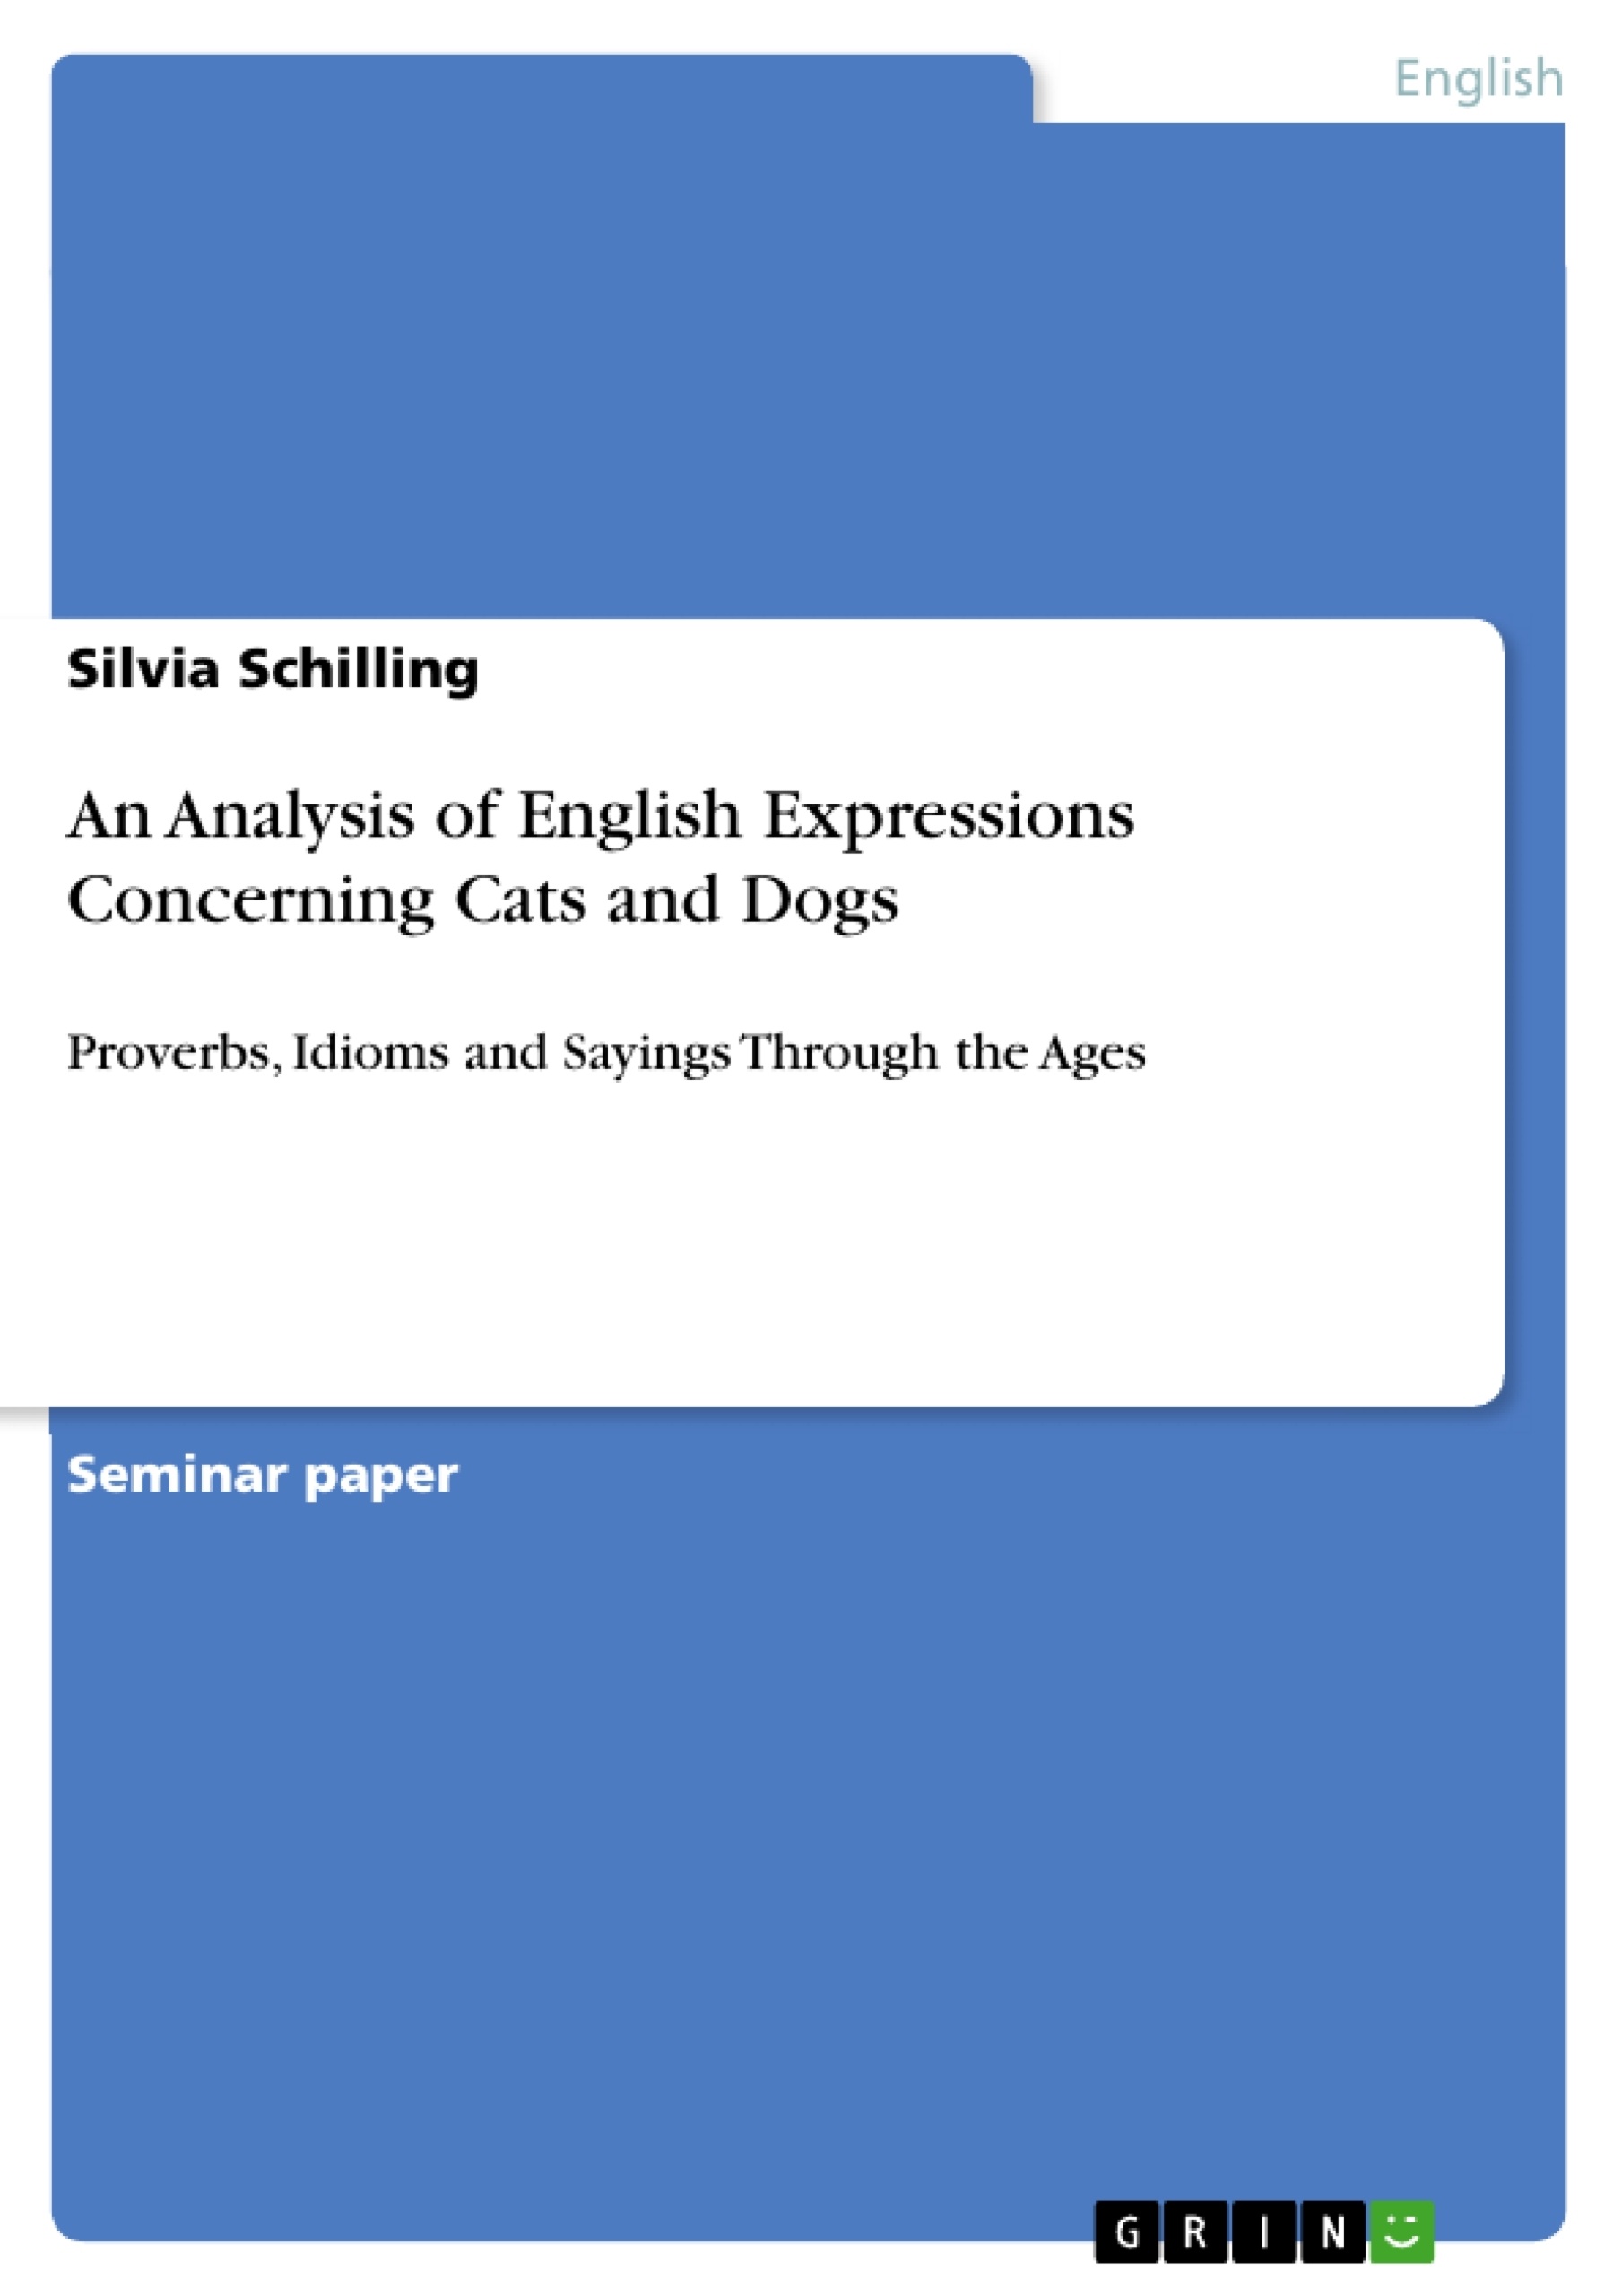 Title: An Analysis of English Expressions Concerning Cats and Dogs